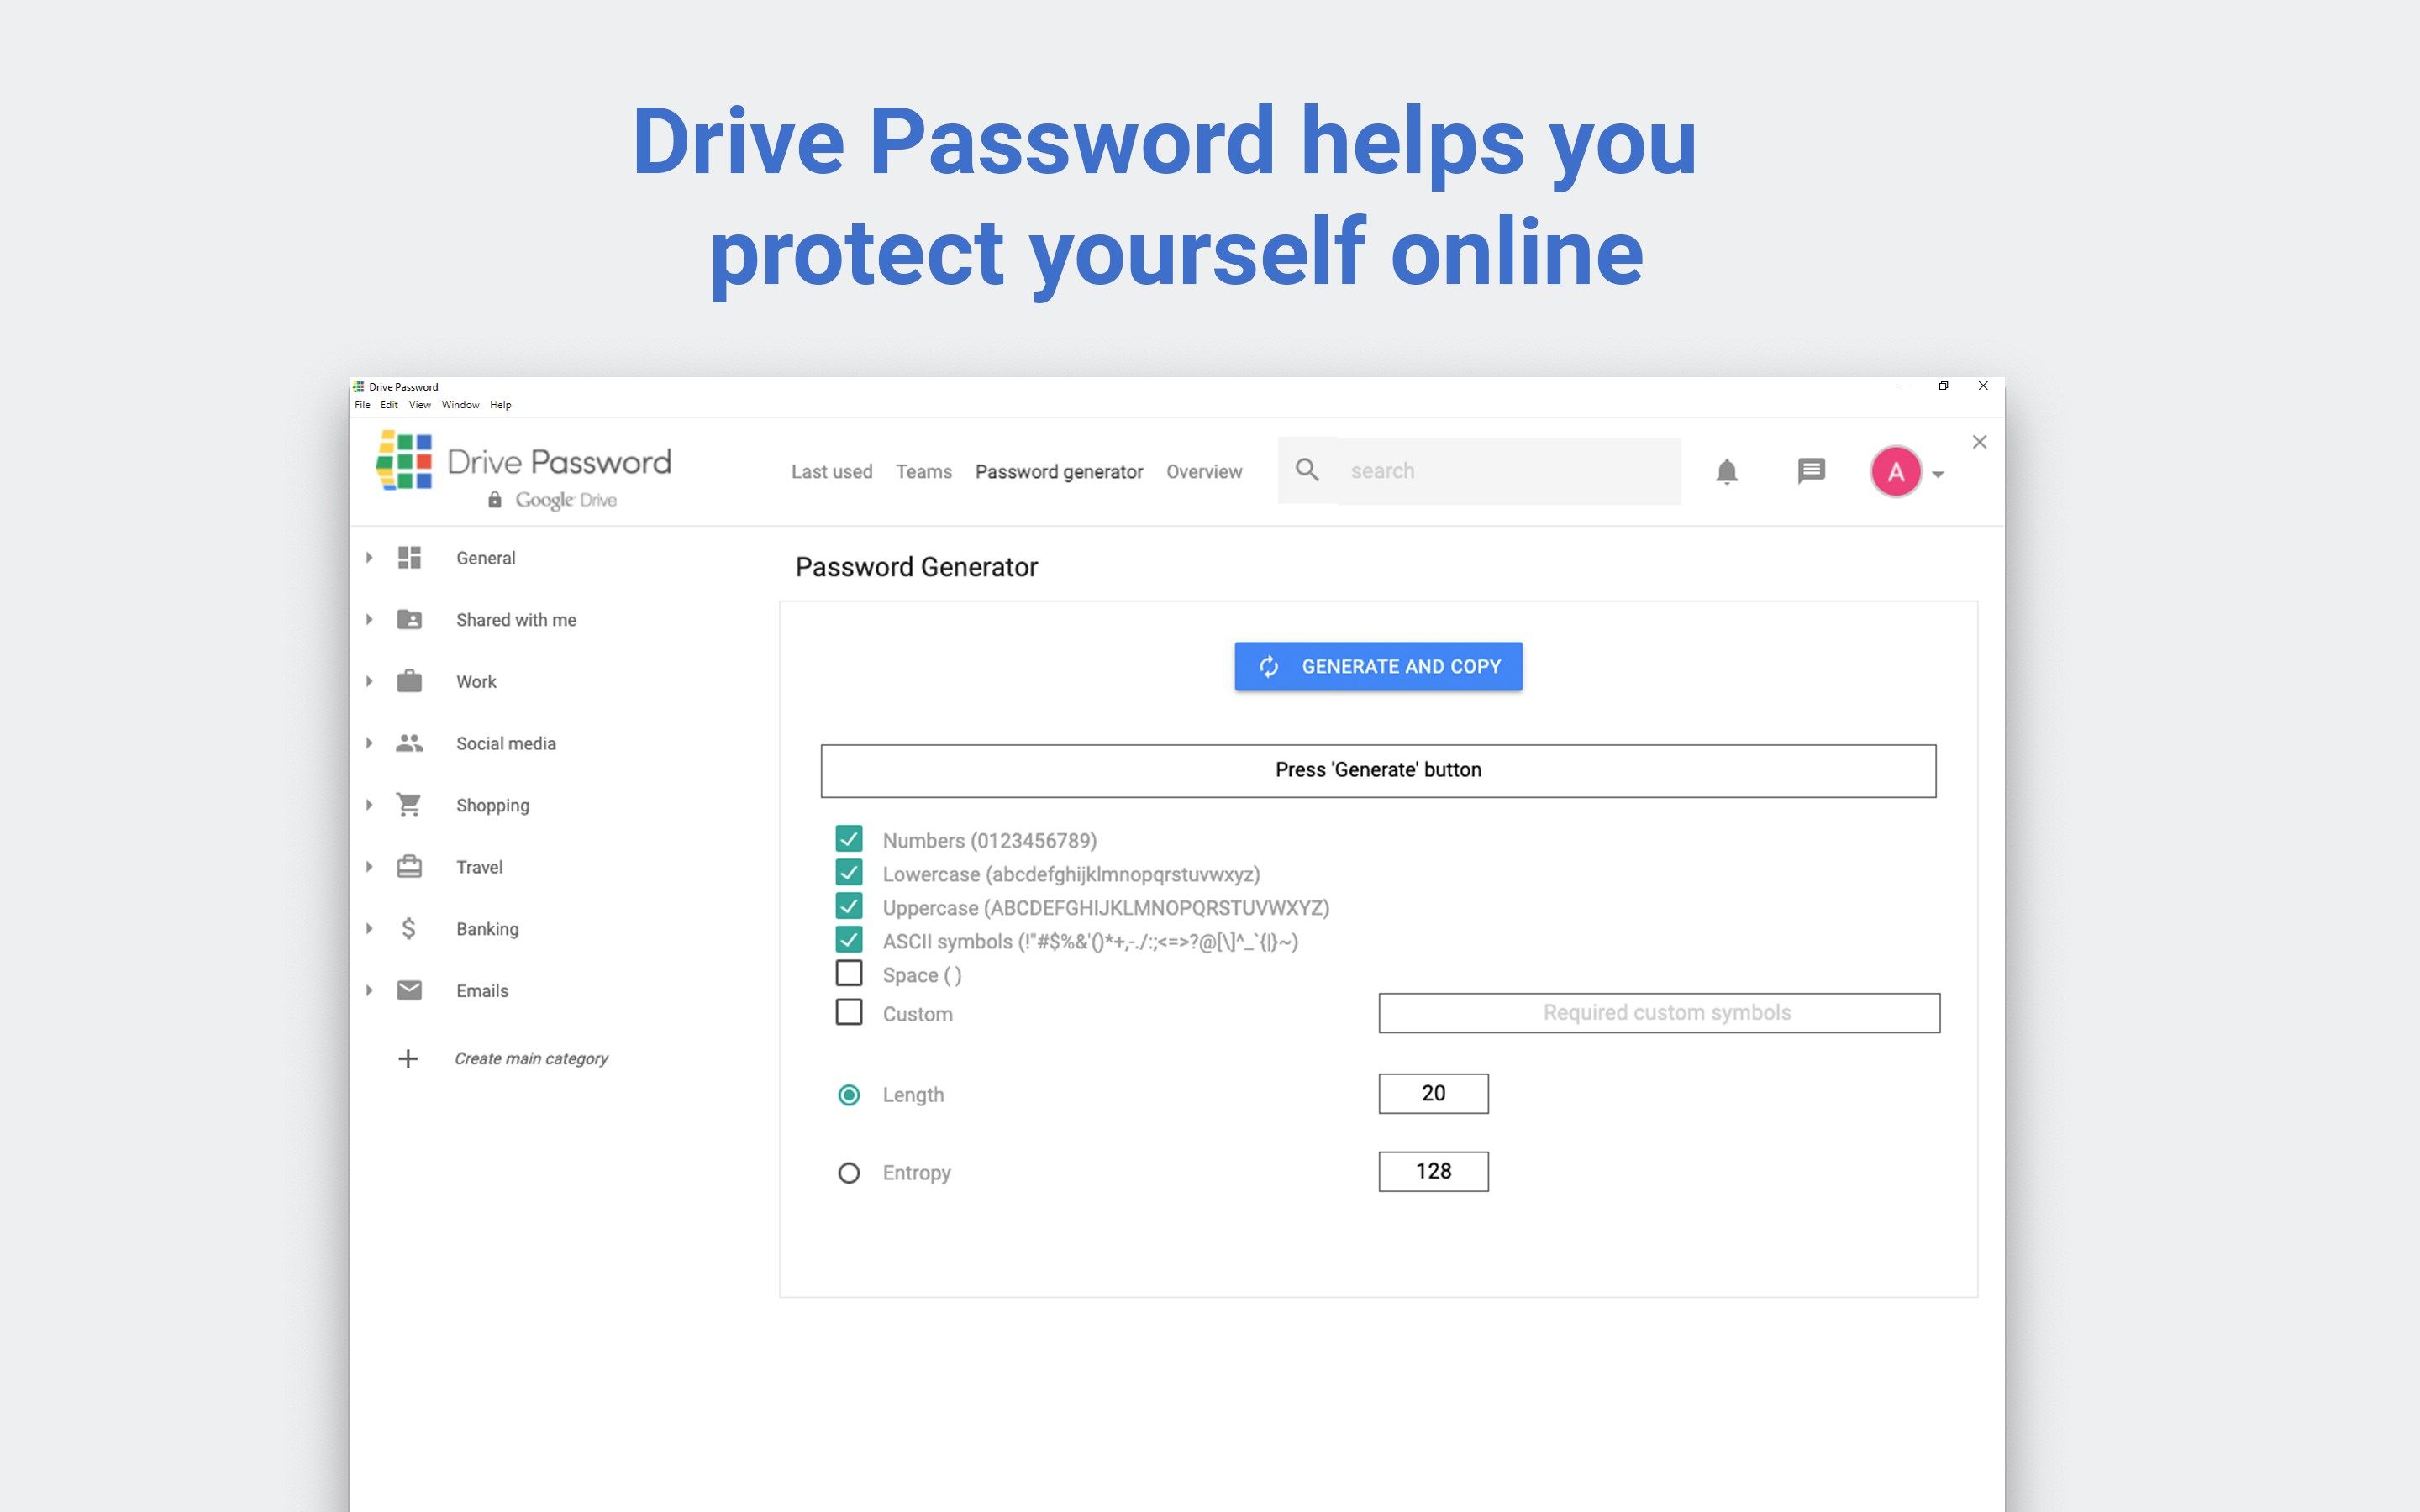 Drive Password helps your protect yourself online